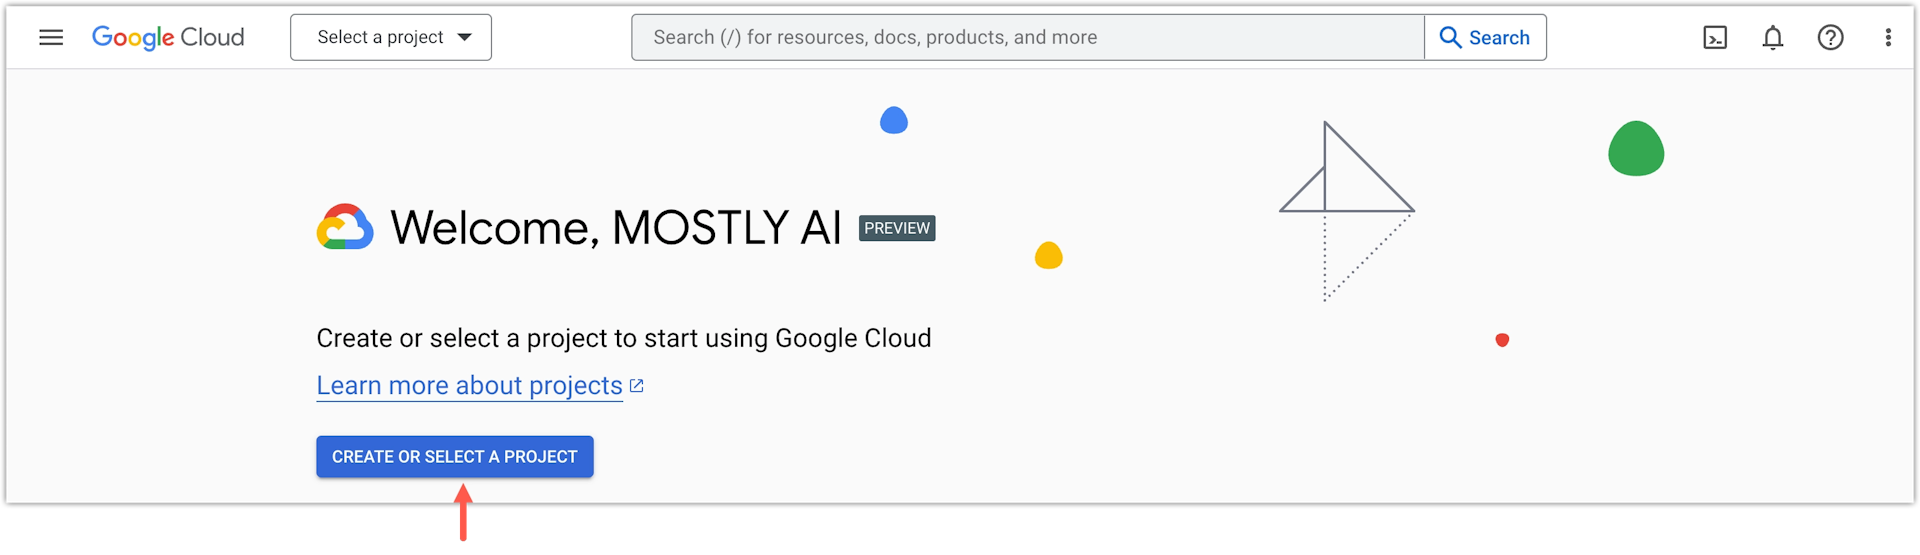 Google Cloud - Click CREATE OR SELECT A PROJECT